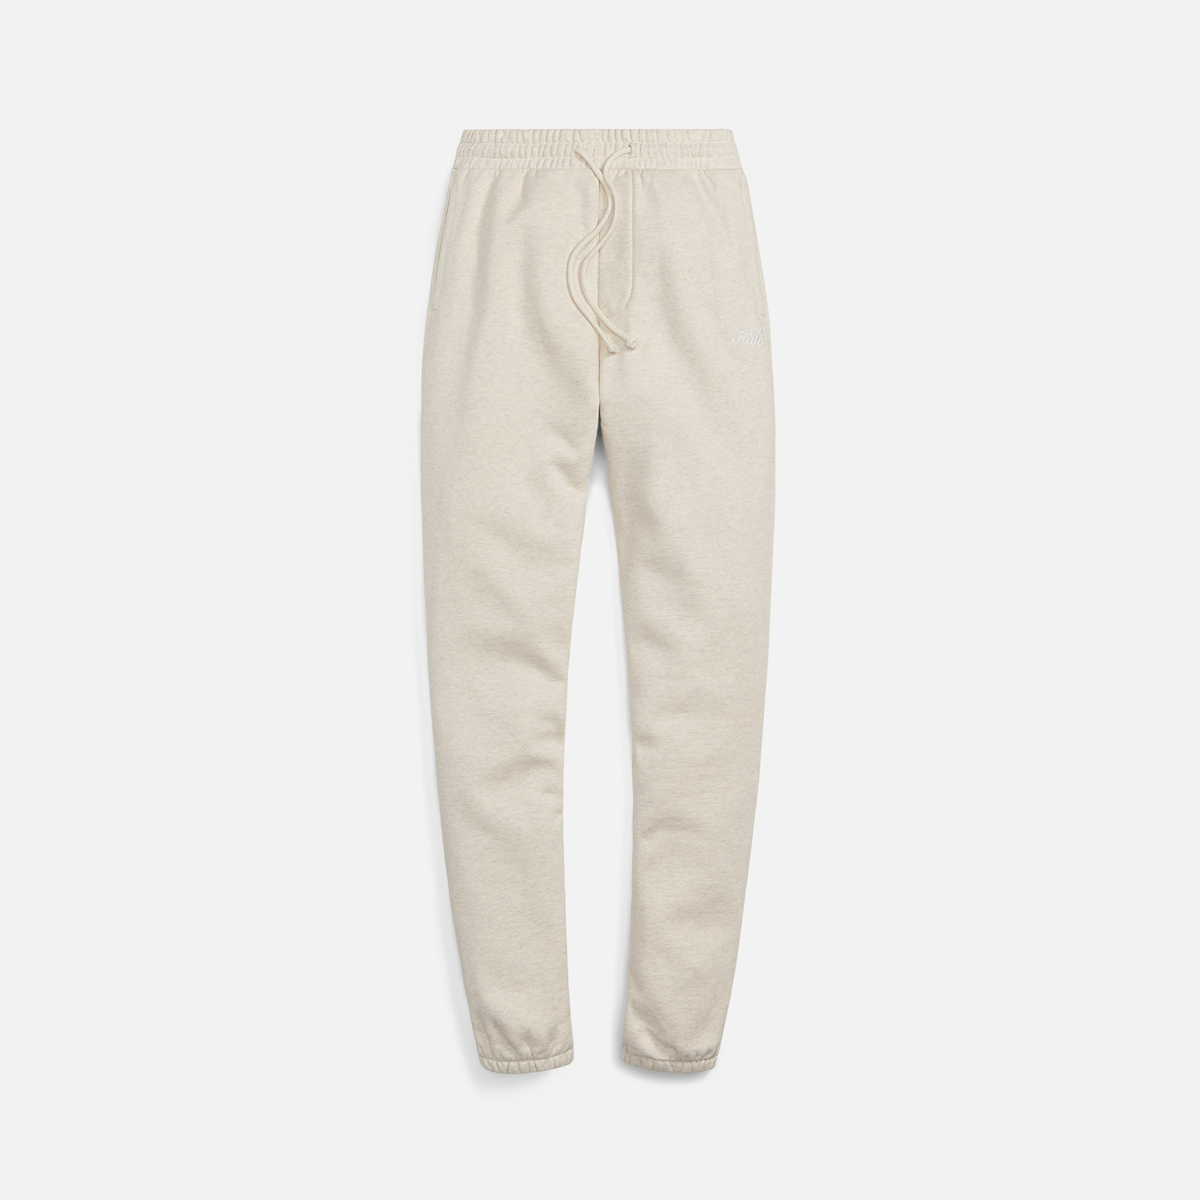 kith-fall-winter-2021-collection-bottoms-13